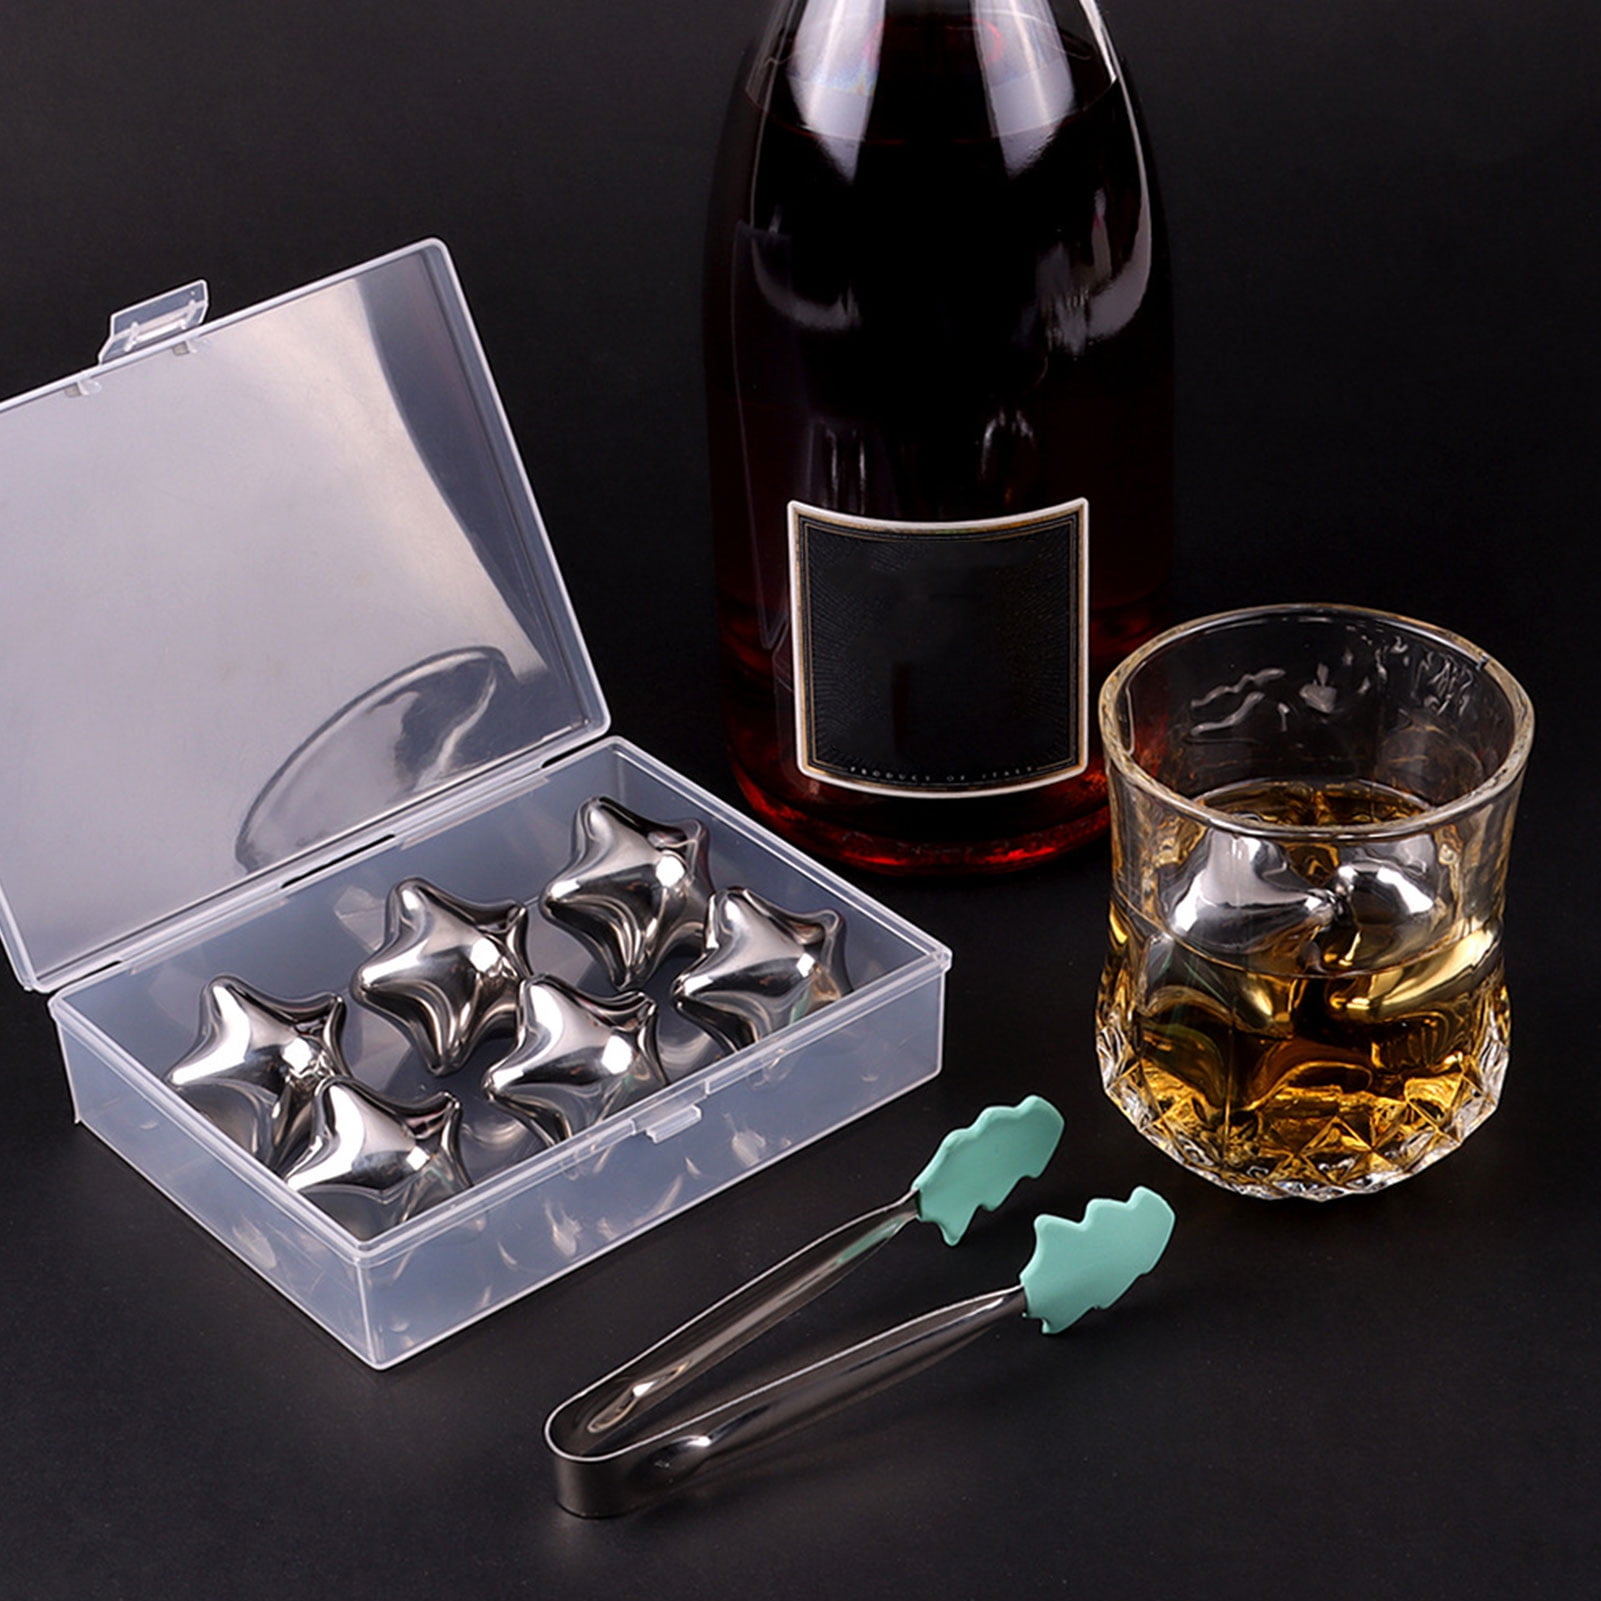 Stainless Steel Ice Cooling Cube Reusable Chilling Rock Stones Vodka Wine Whisky 